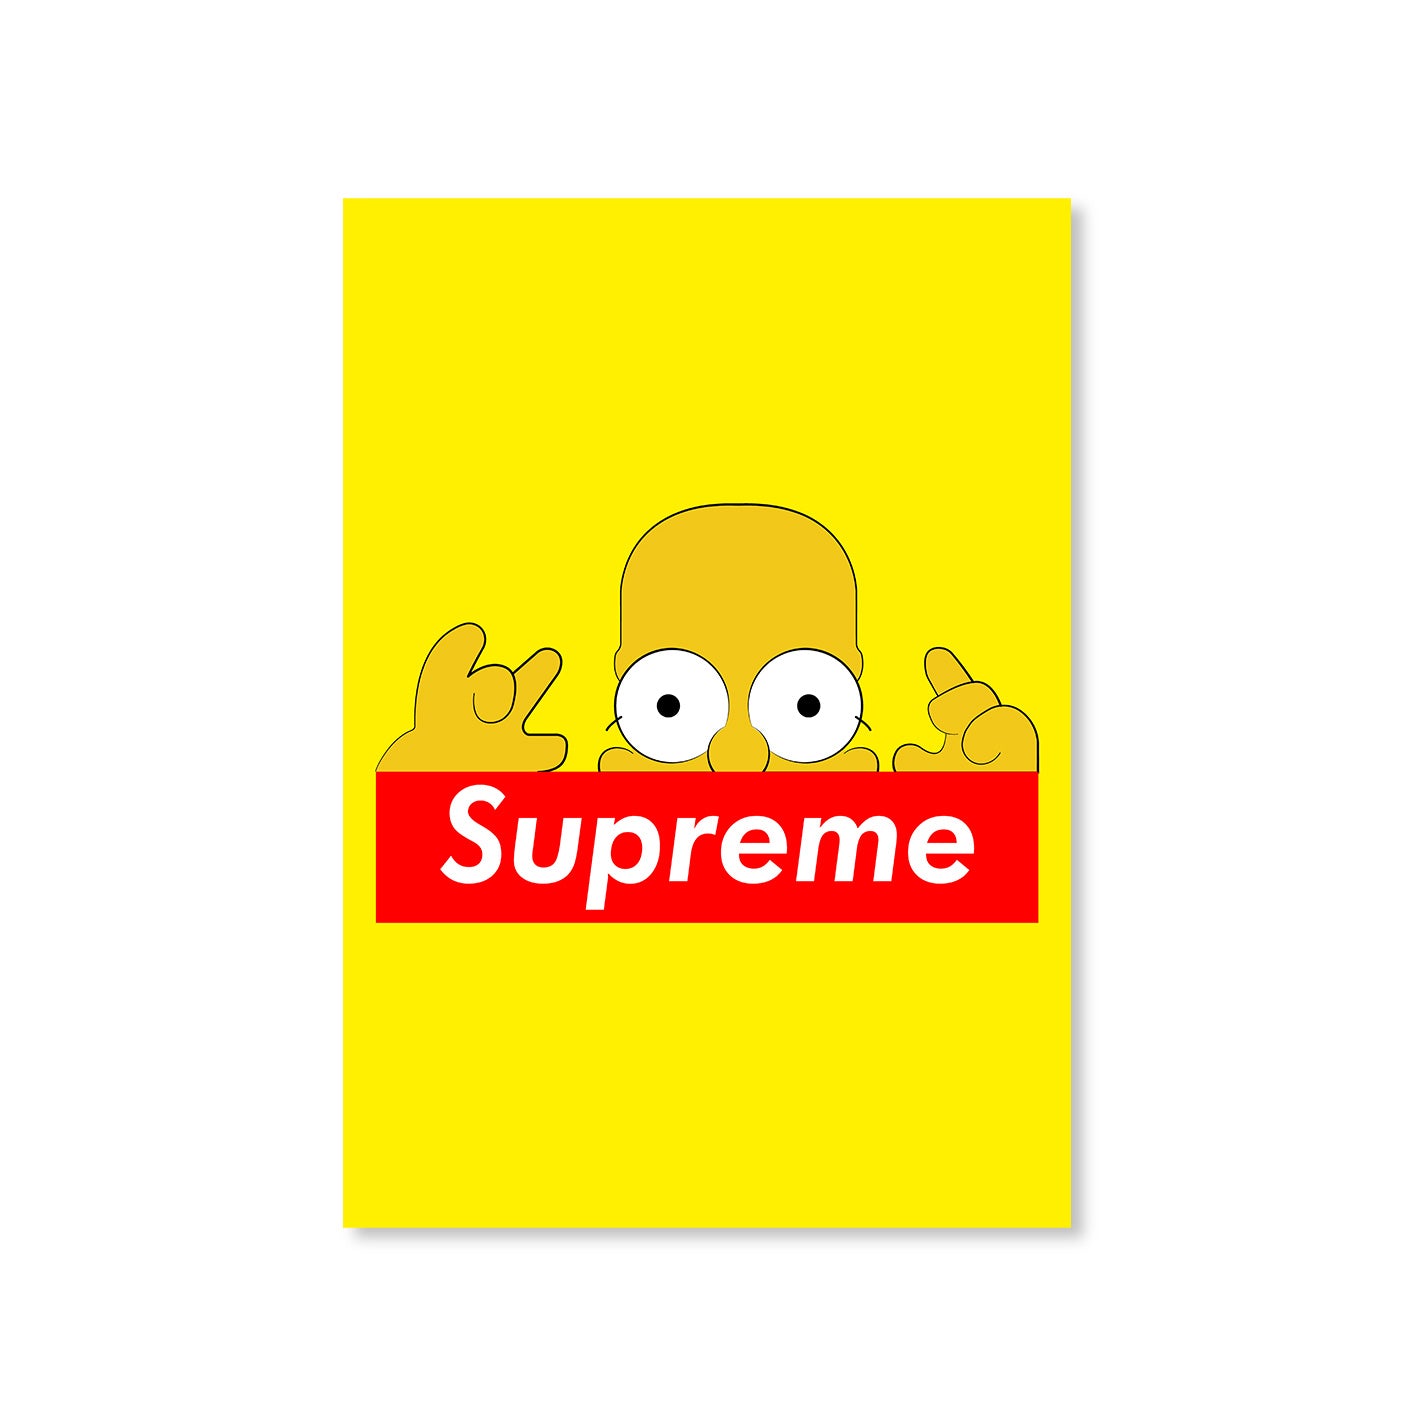 The Simpsons Poster by The Banyan Tee Poster for Wall Poster Design 